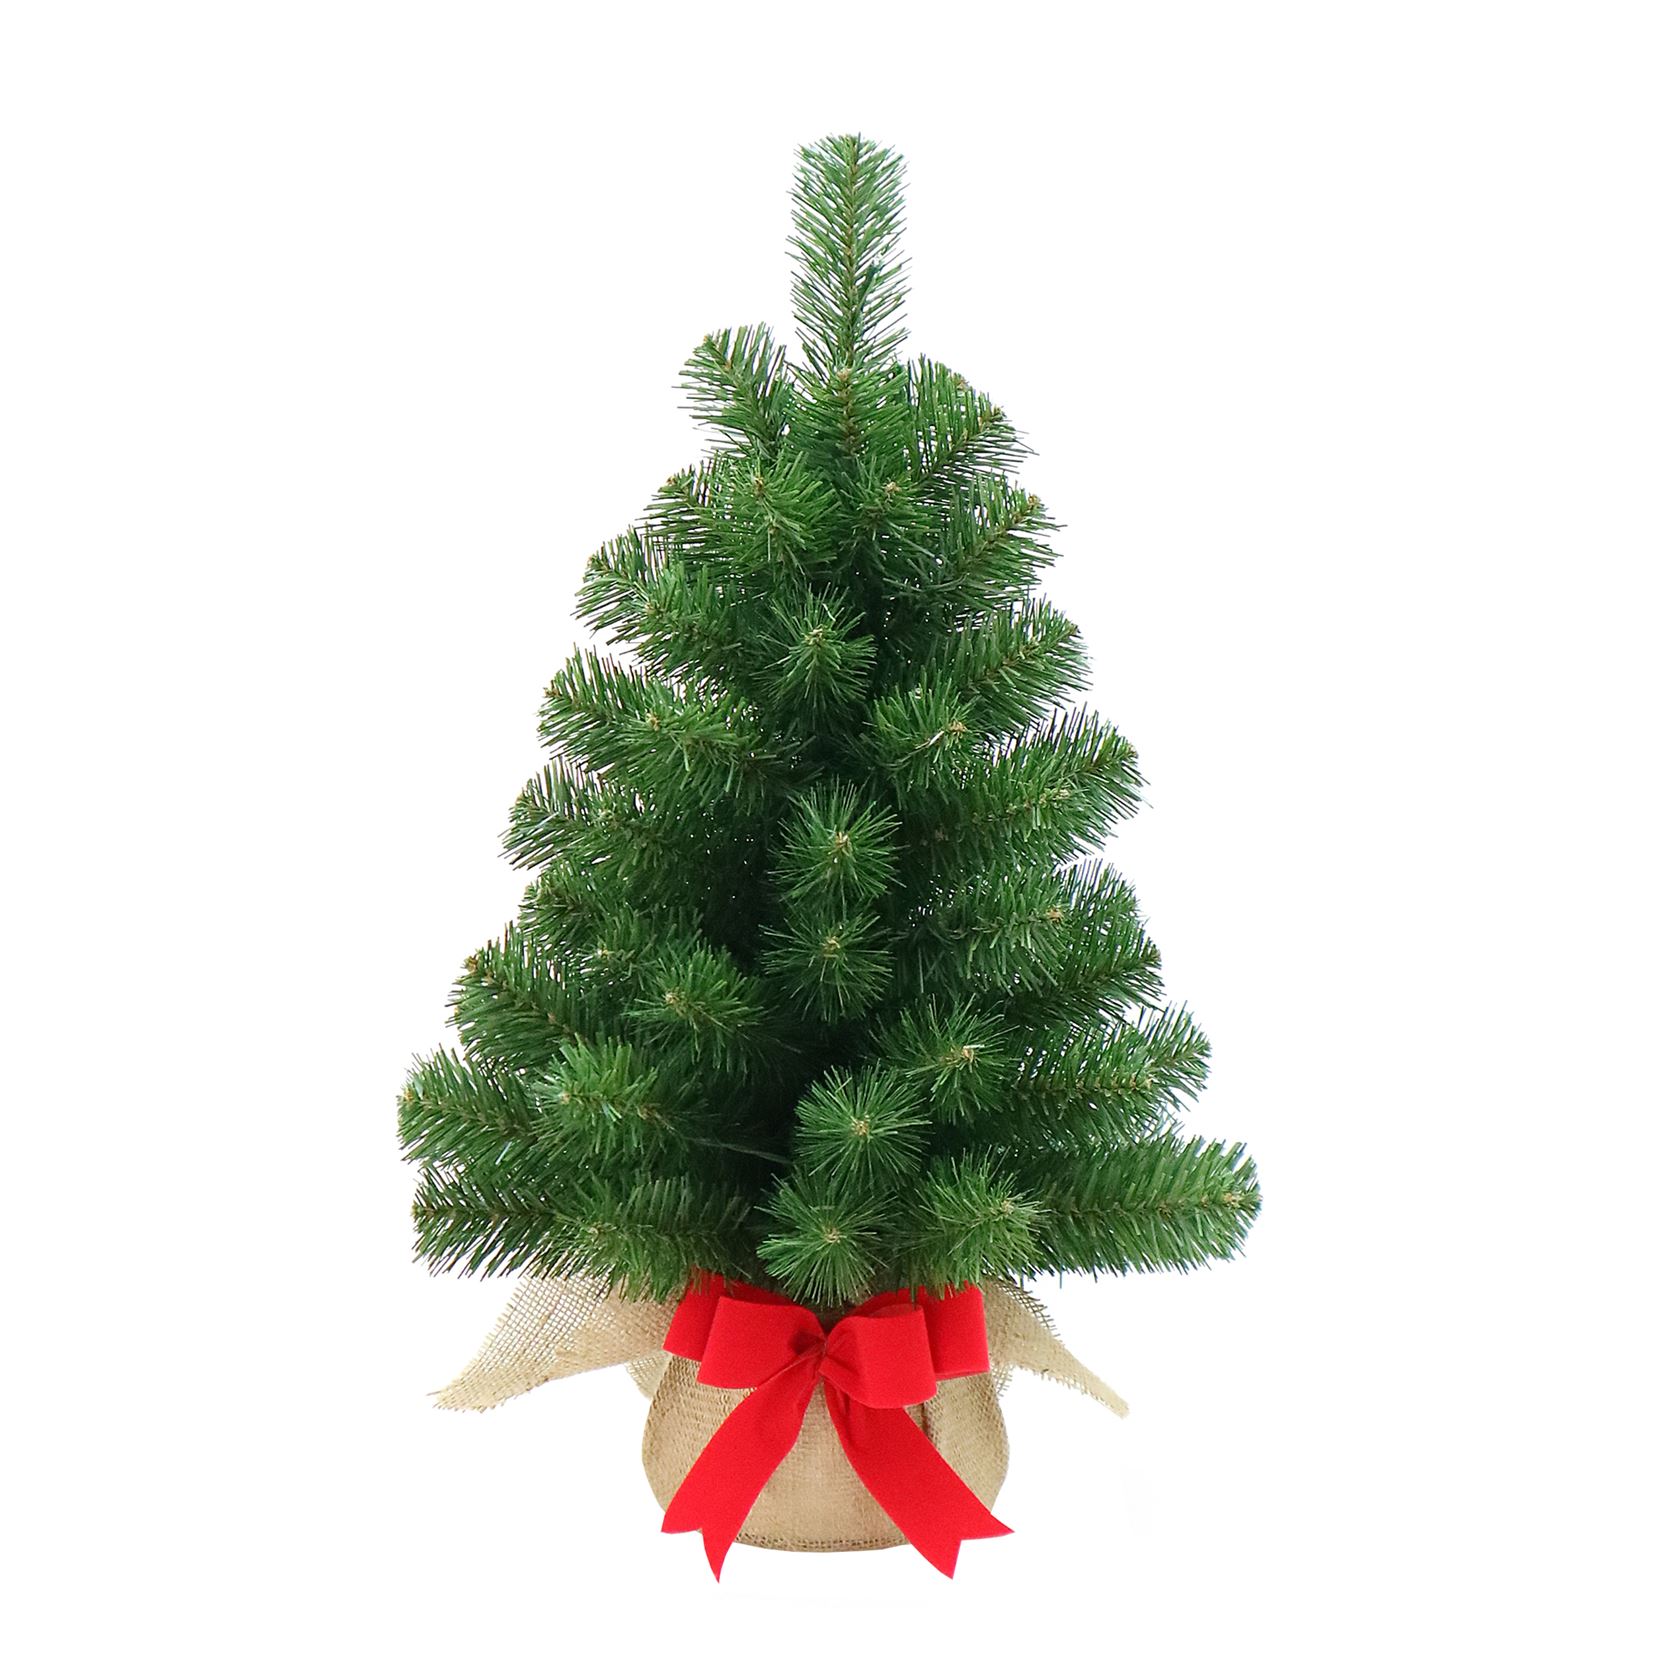 New-Noble-Spruce-Tree-with-Burlap-Bag-h61cm